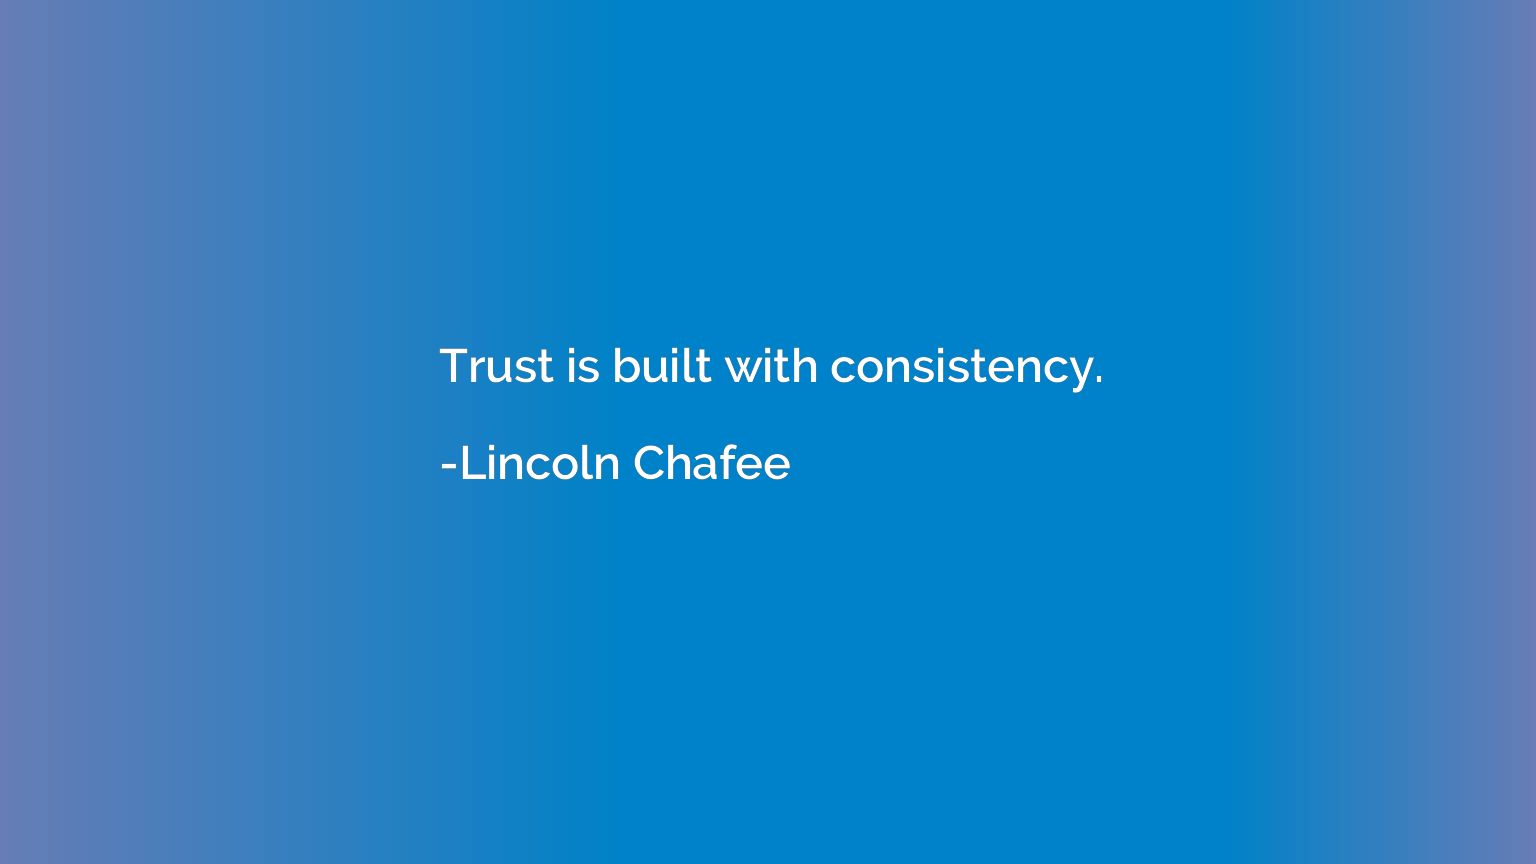 Trust is built with consistency.